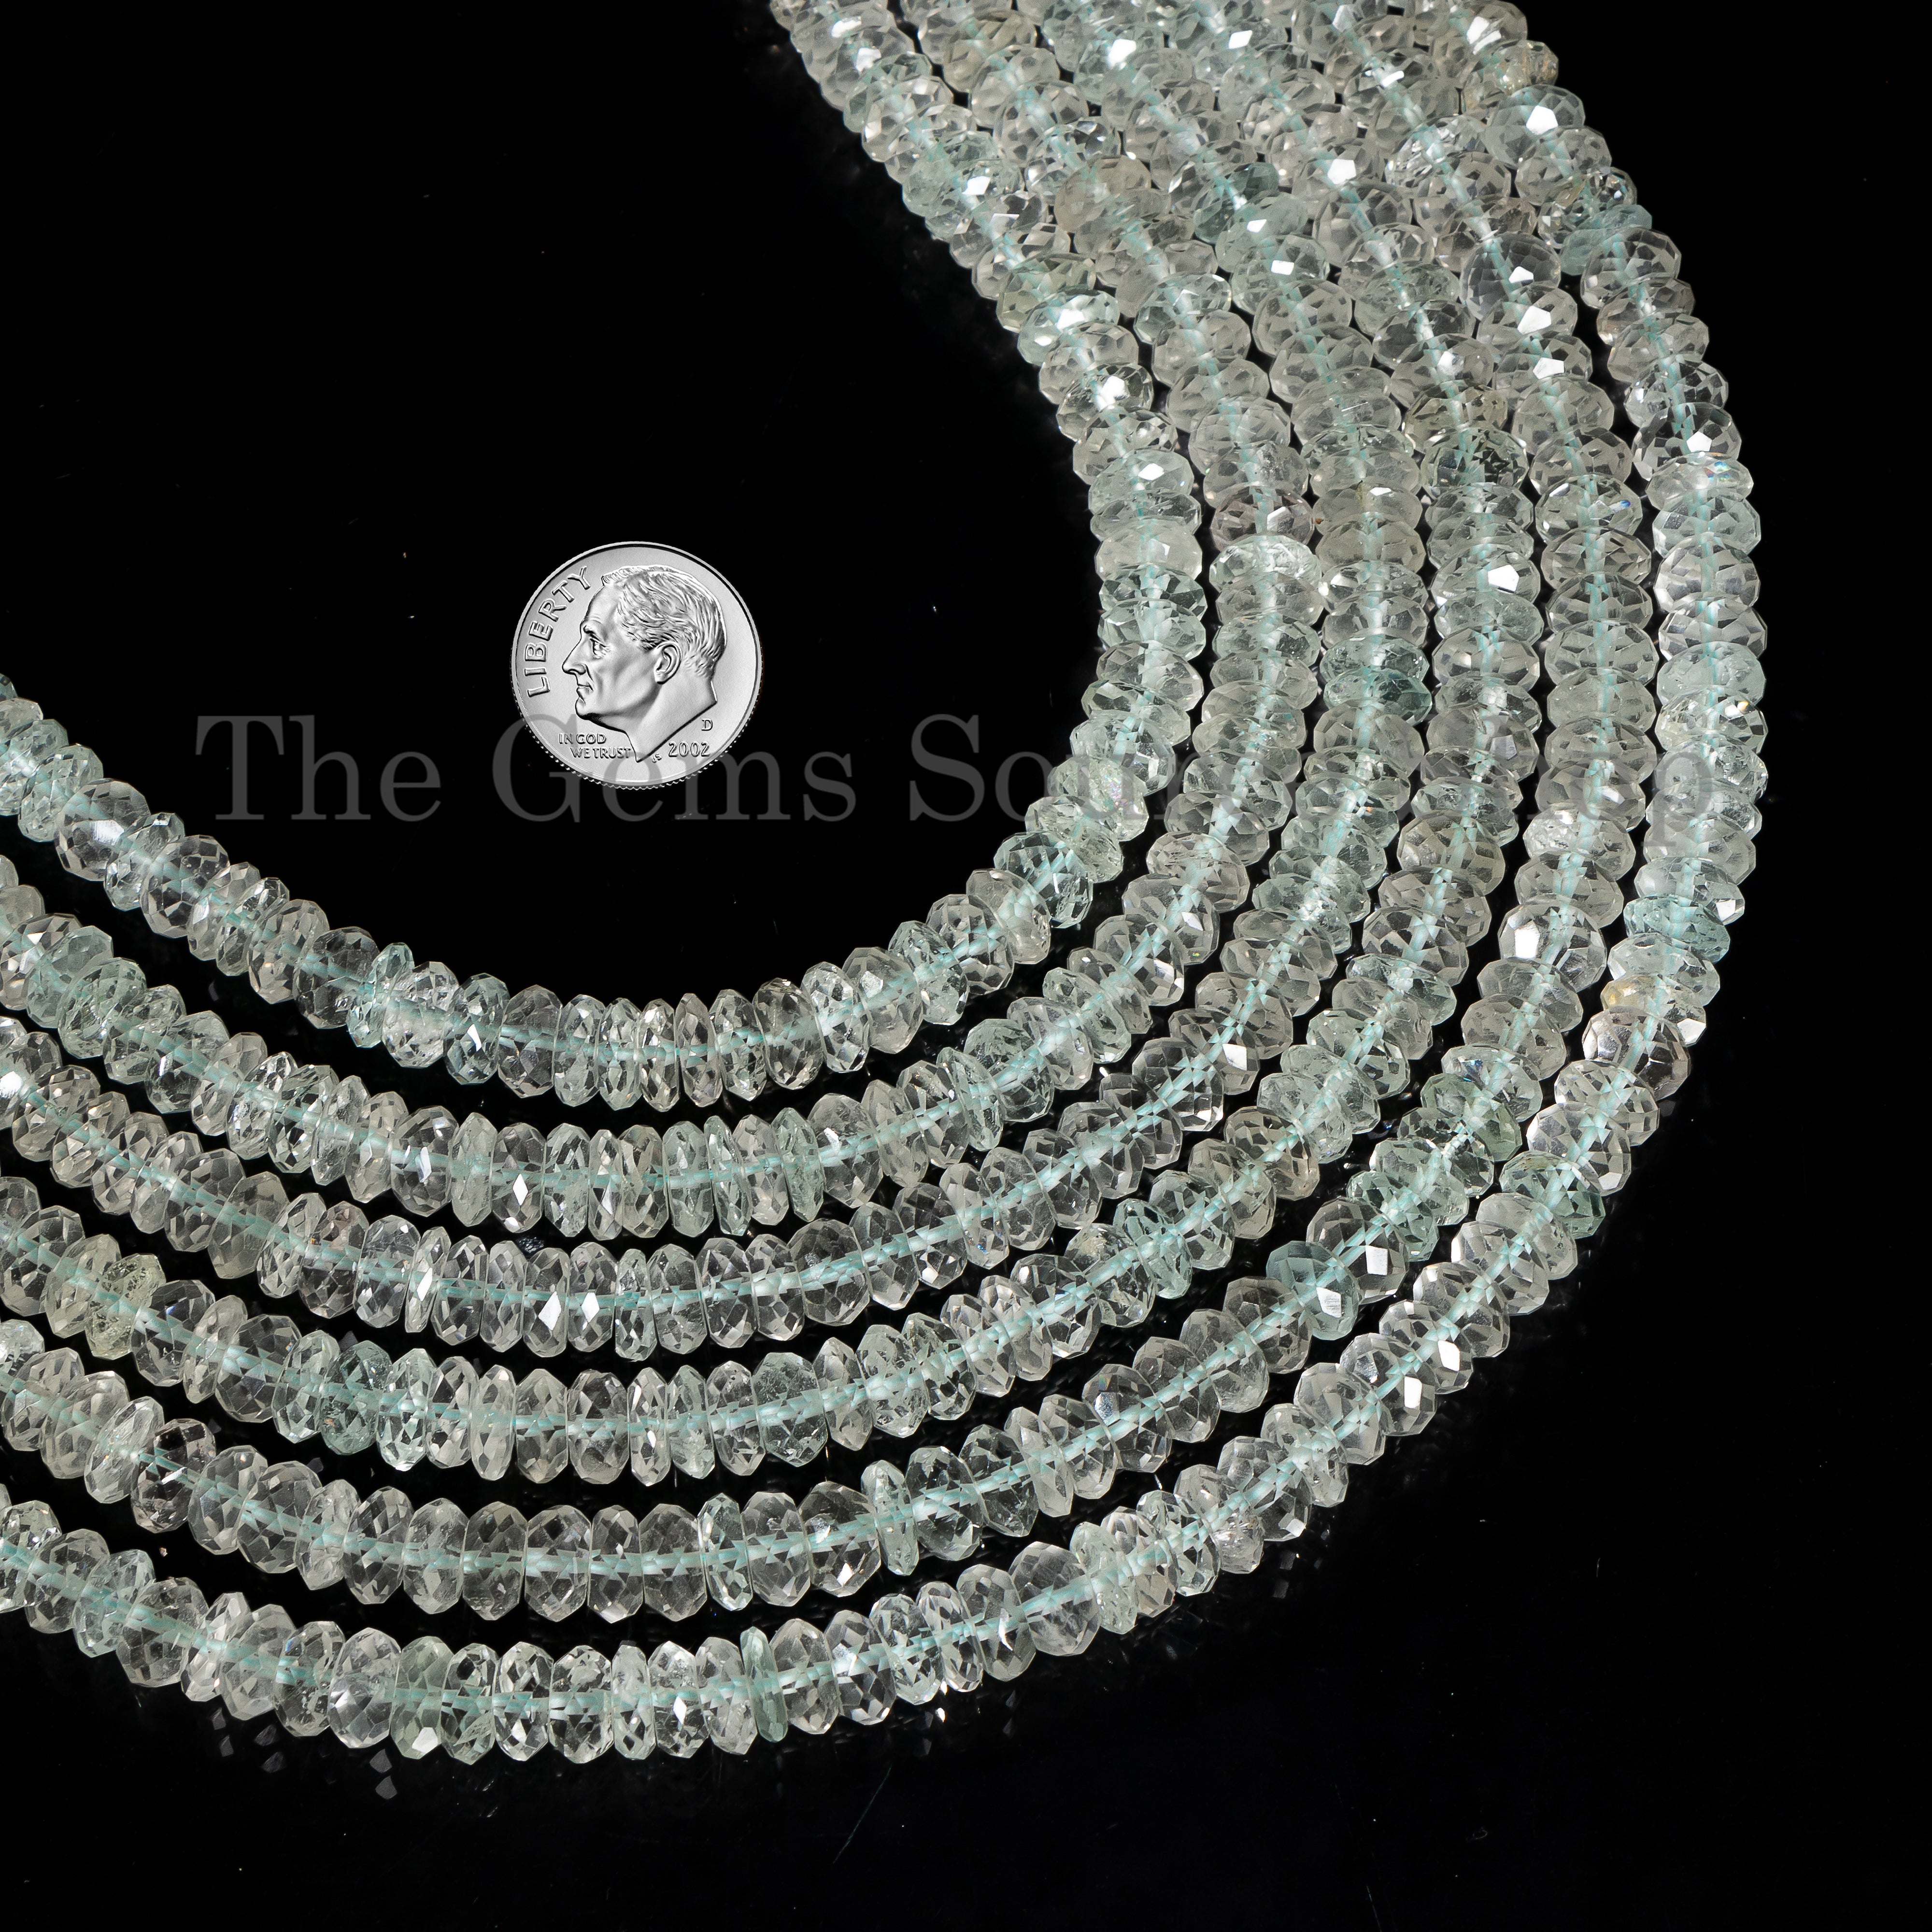 Natural Aquamarine Rondelle Faceted Beads, Aquamarine 7-8mm Gemstone Beads for Jewelry Making. TGS-5143